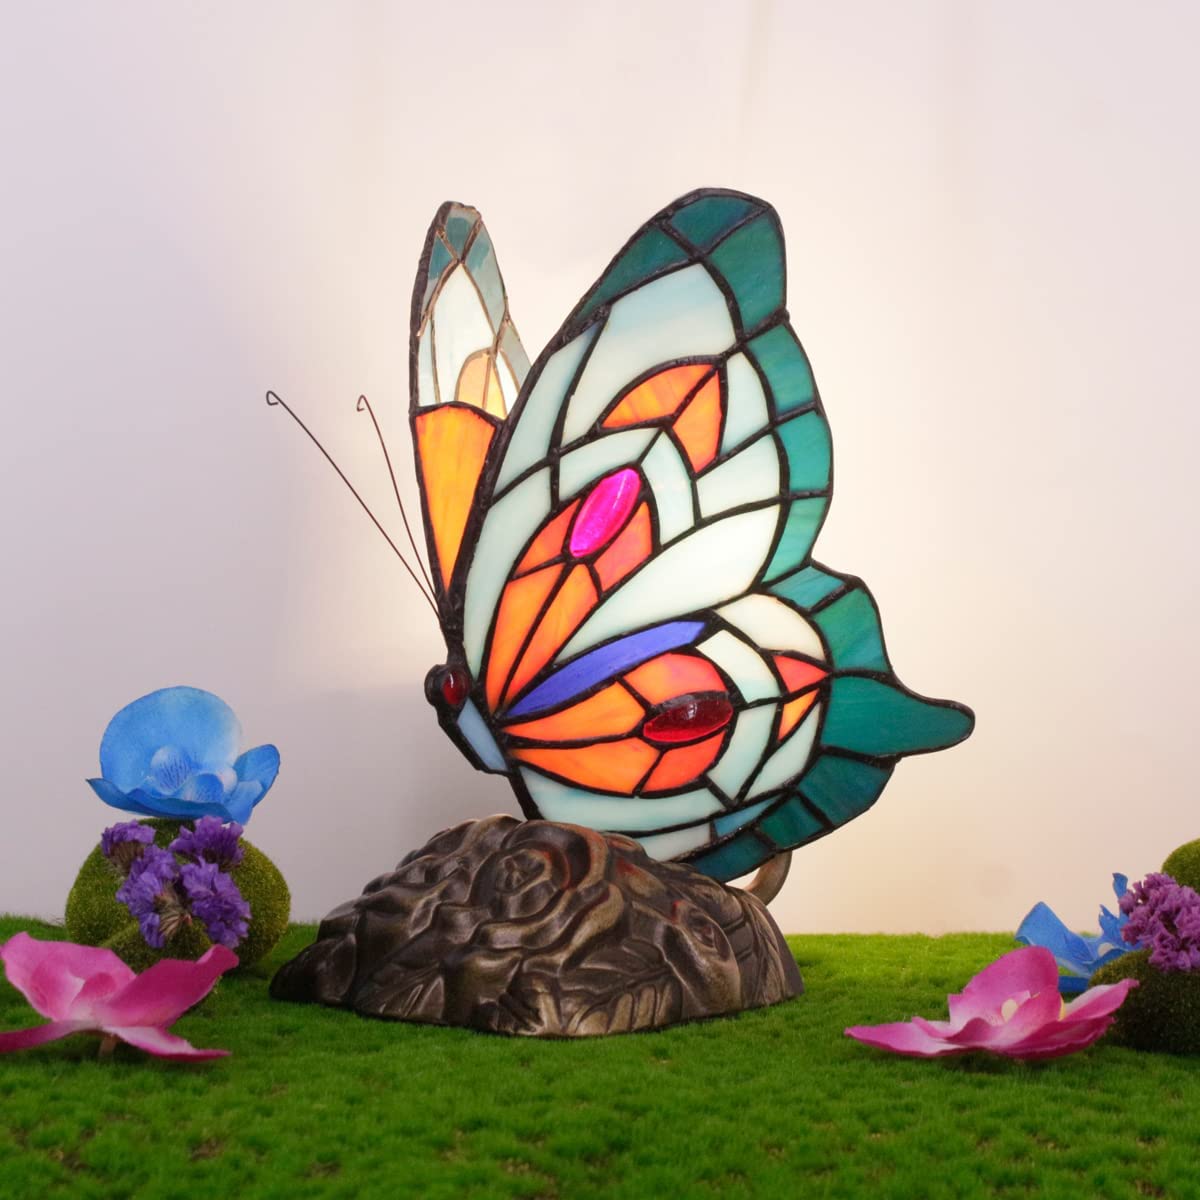 Werfactory® Tiffany Butterfly Style Table Lamp Blue Stained Glass Desk Night Light